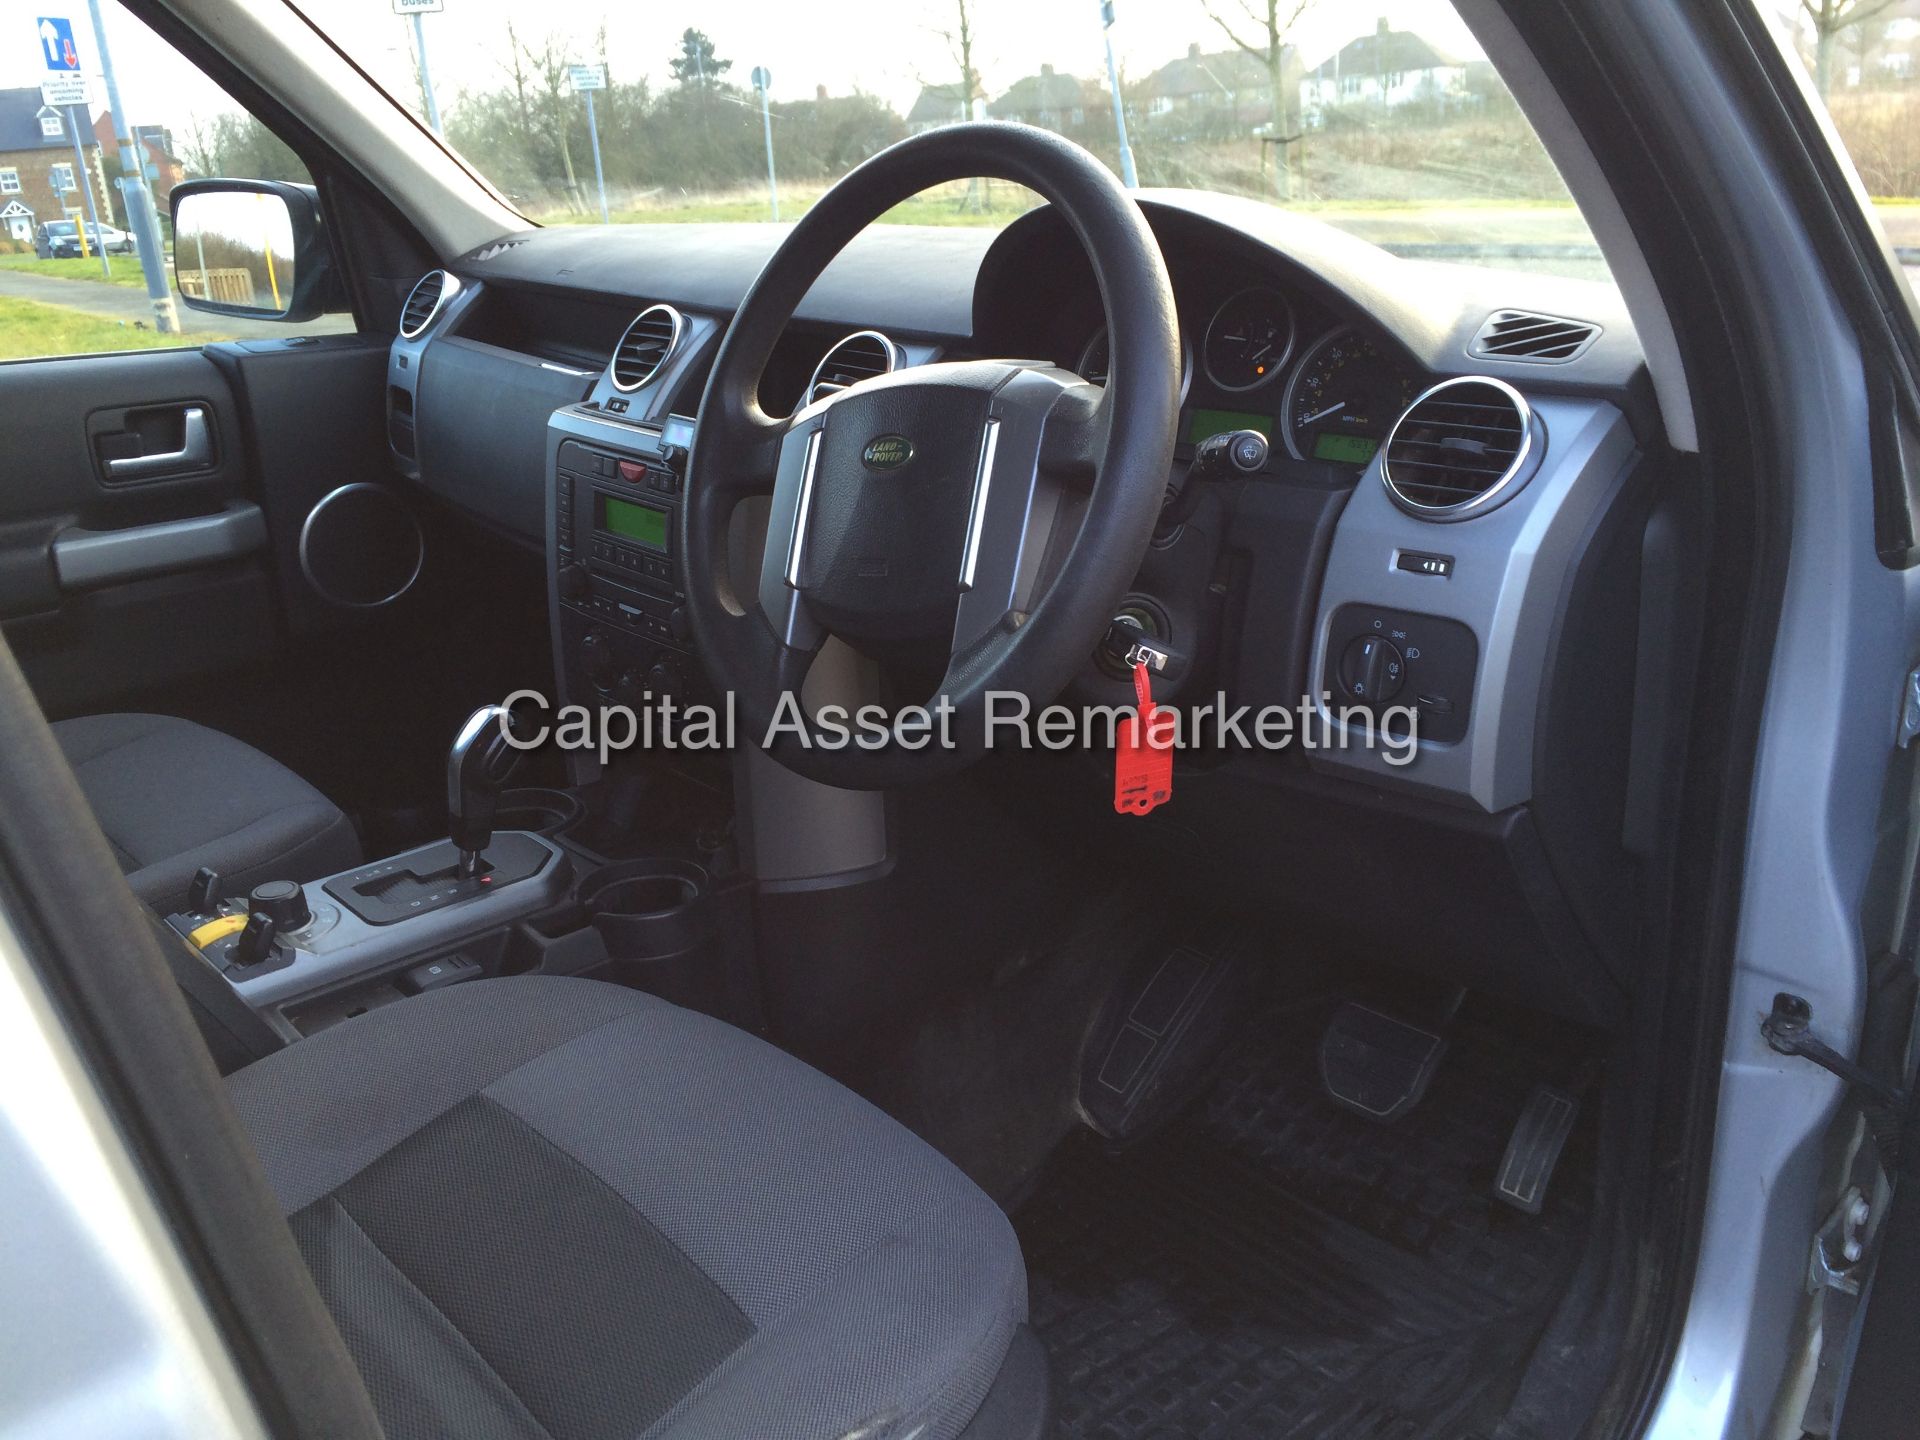 LANDROVER DISCOVERY 3 "TDV6" AUTOMATIC - 1 PREVIOUS OWNER FROM NEW - AIR SUSPENSION - PRIVACY GLASS! - Image 10 of 18